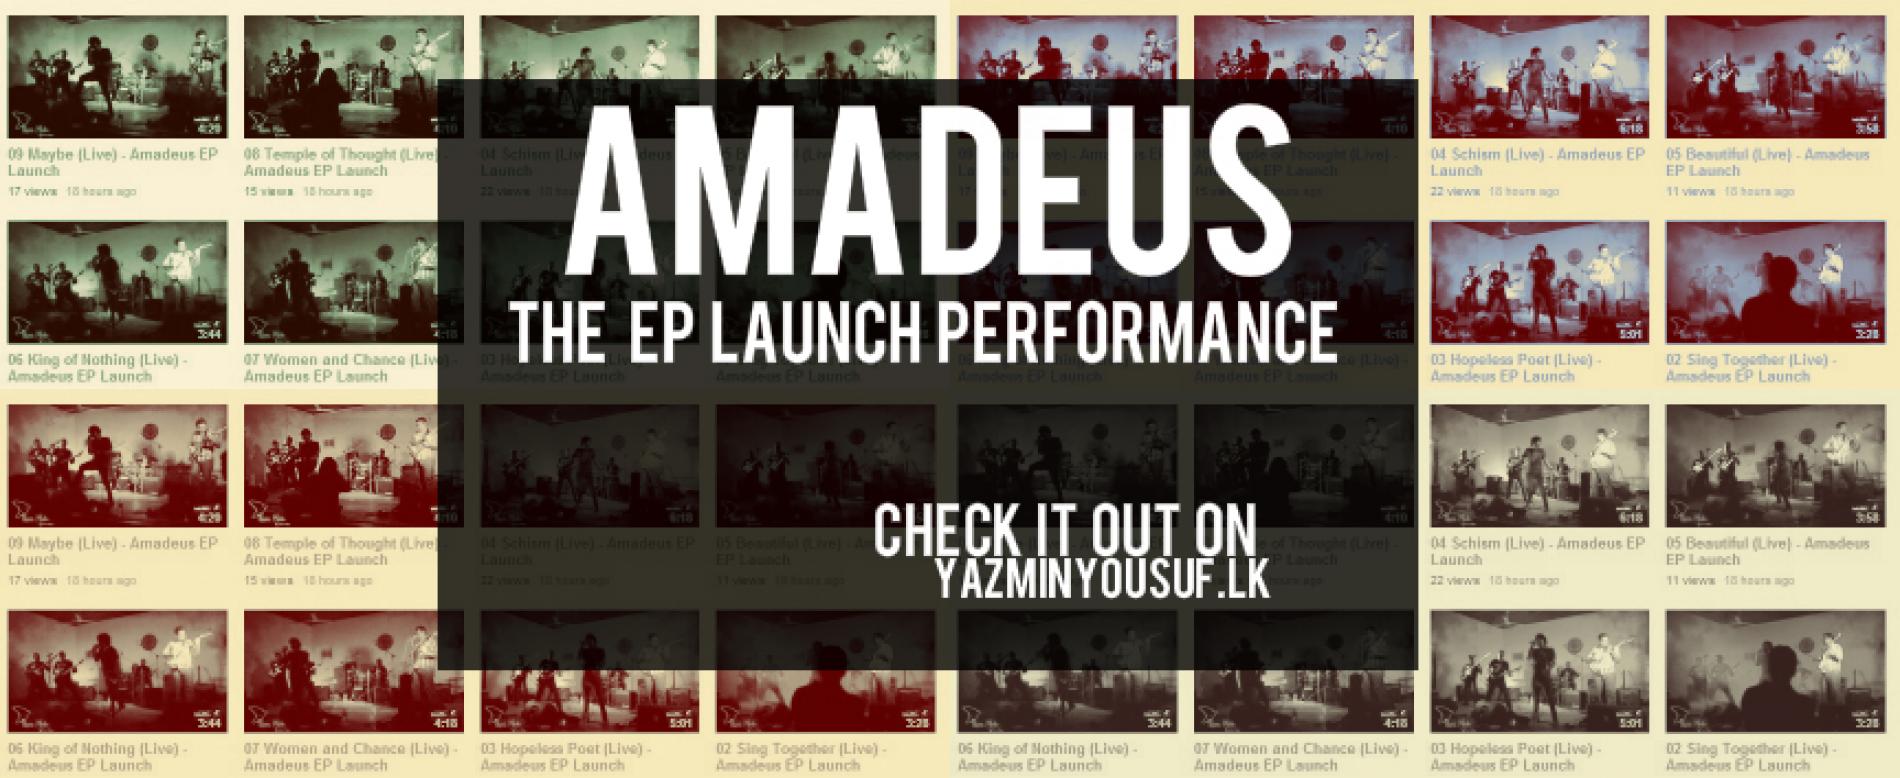 Videos From The Amadeus EP Launch